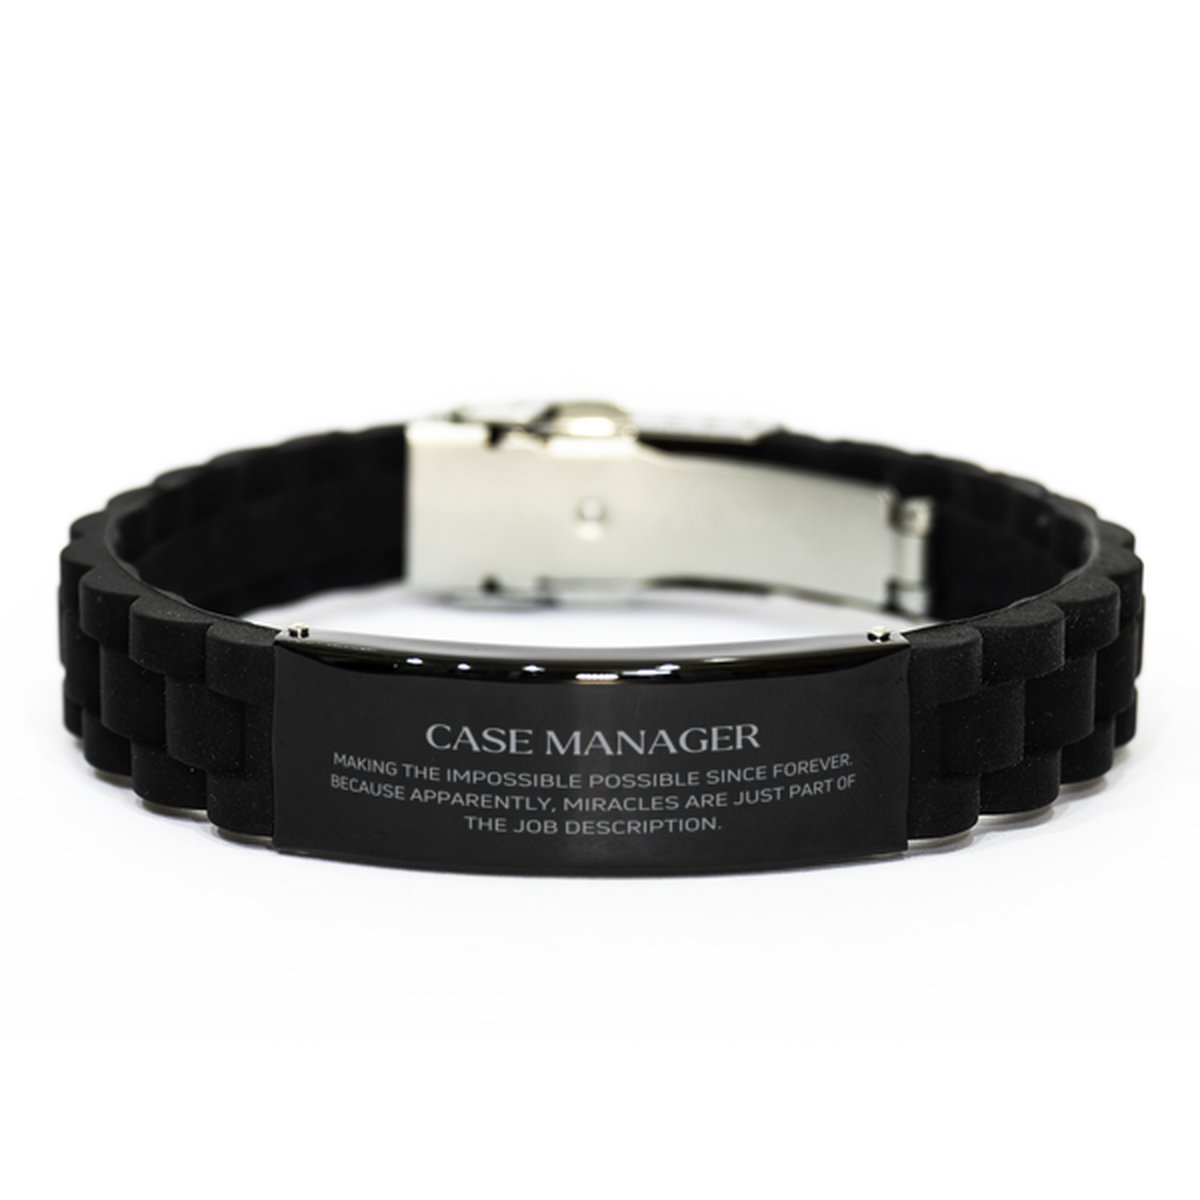 Funny Case Manager Gifts, Miracles are just part of the job description, Inspirational Birthday Black Glidelock Clasp Bracelet For Case Manager, Men, Women, Coworkers, Friends, Boss